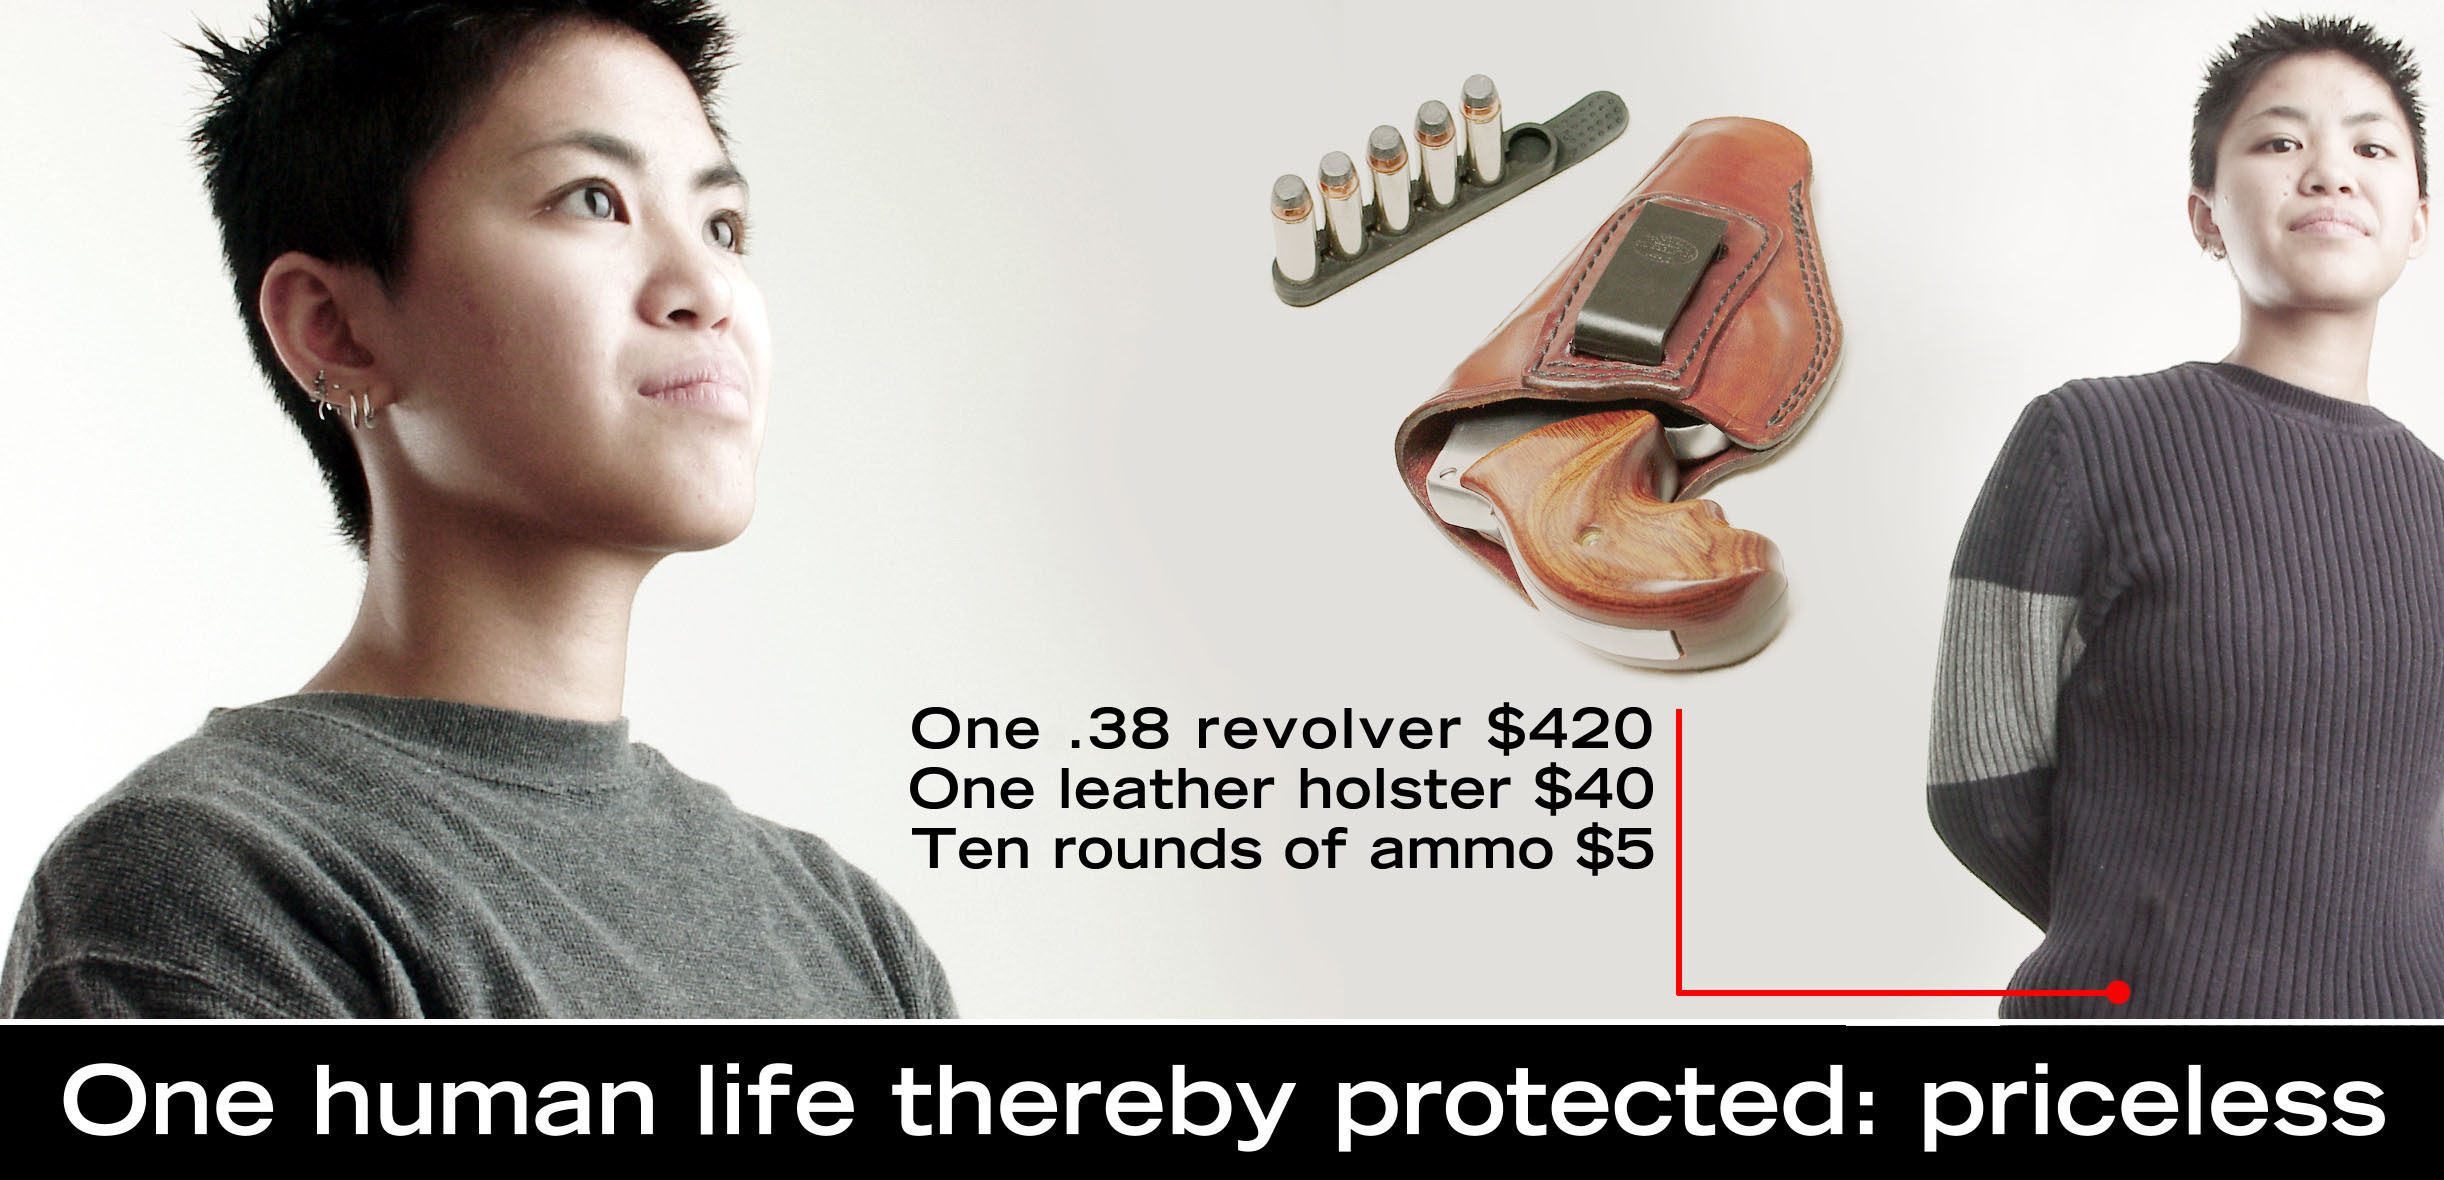 One Human Life Thereby Protected: Priceless